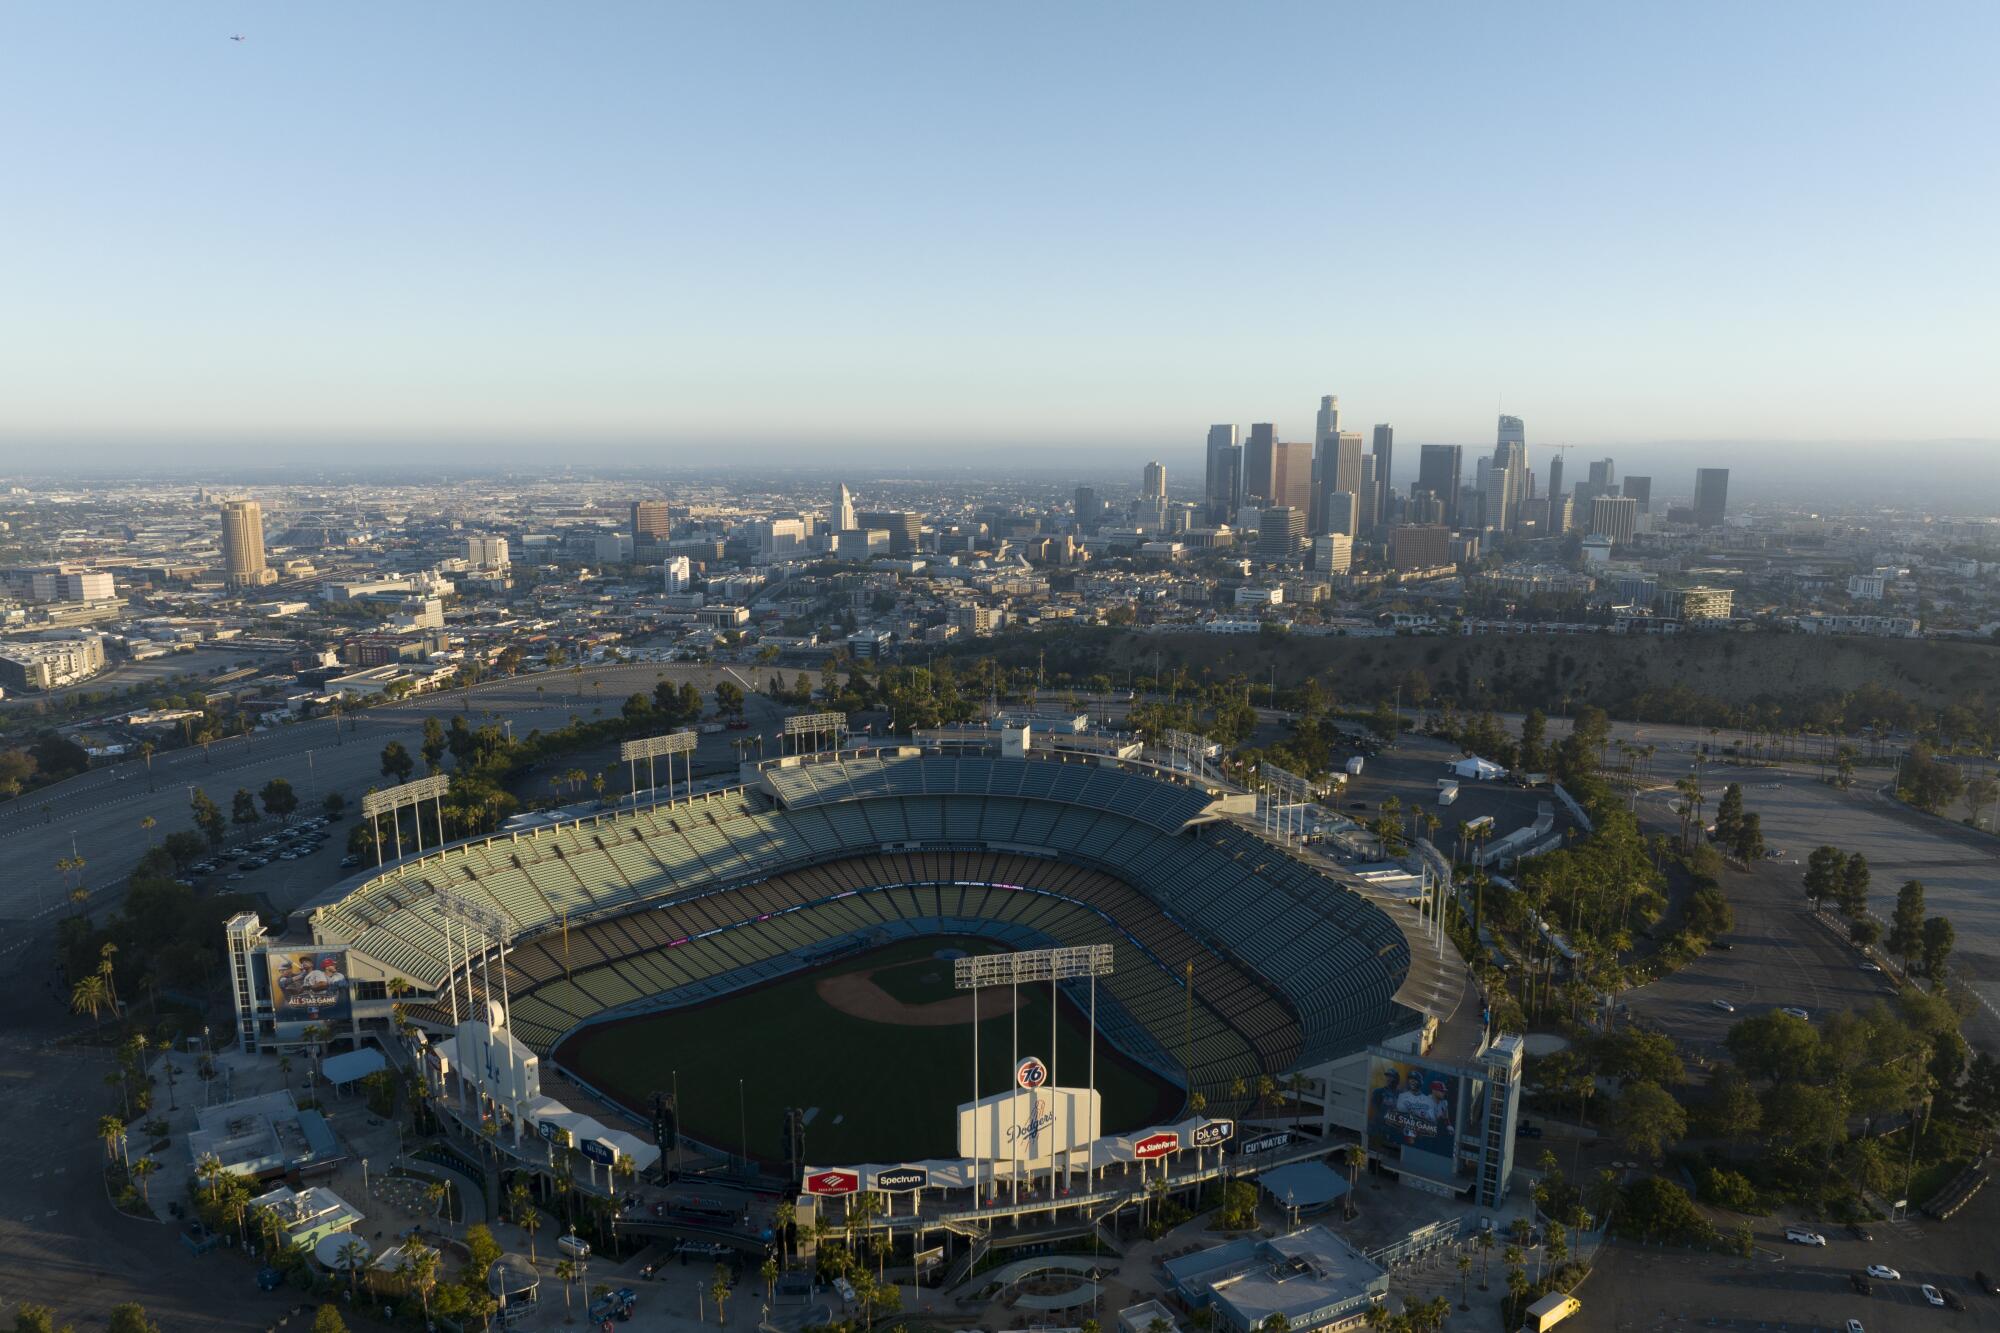 Every MLB All-Star Game Hosted By Dodgers In Franchise History